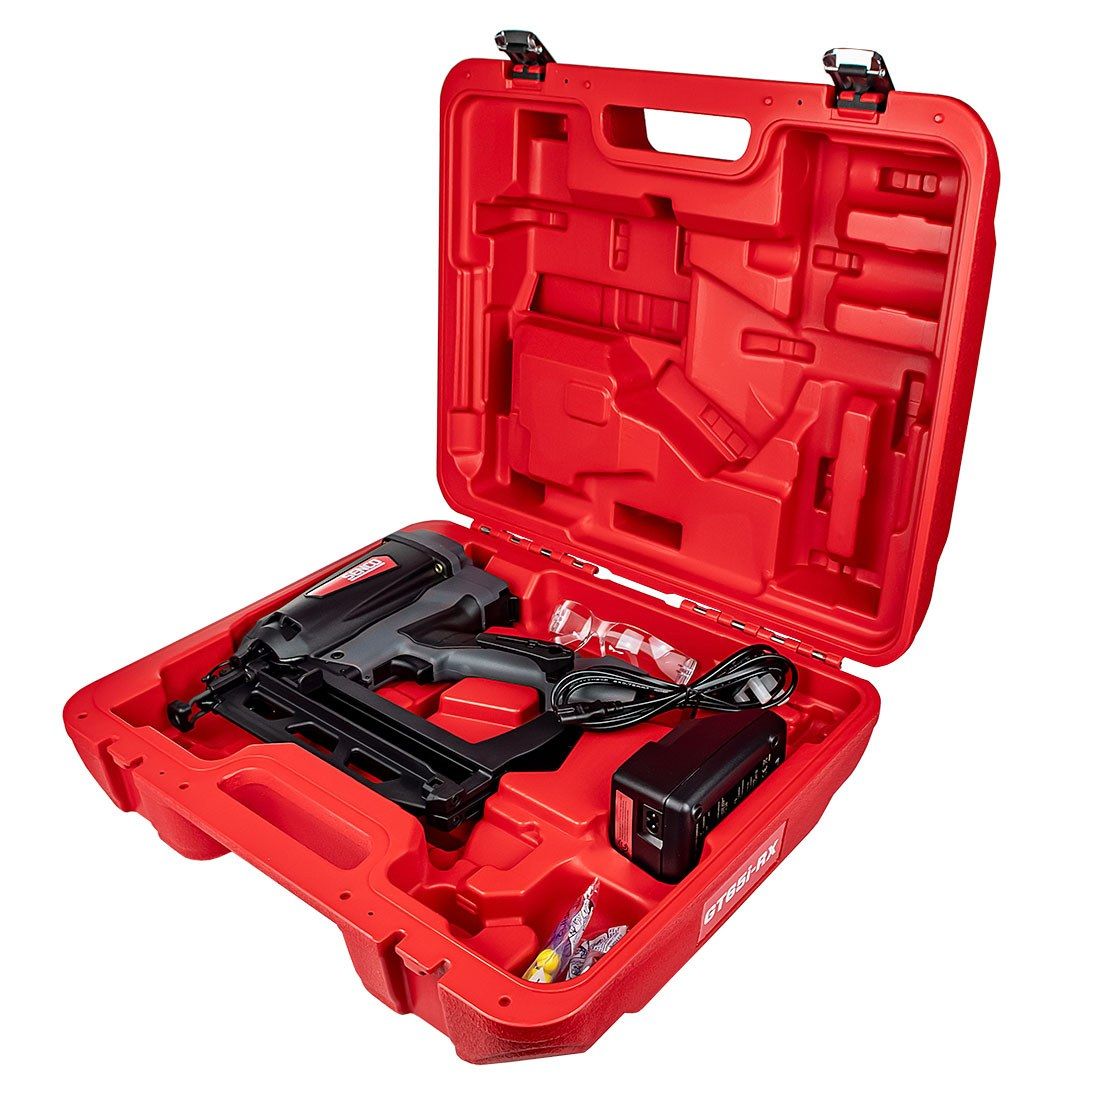 Senco GT65i-RX 7.2V 2nd Fix Gas Nail Gun With 2 x 2.5Ah Batteries Charger In Case - 10VS7001N